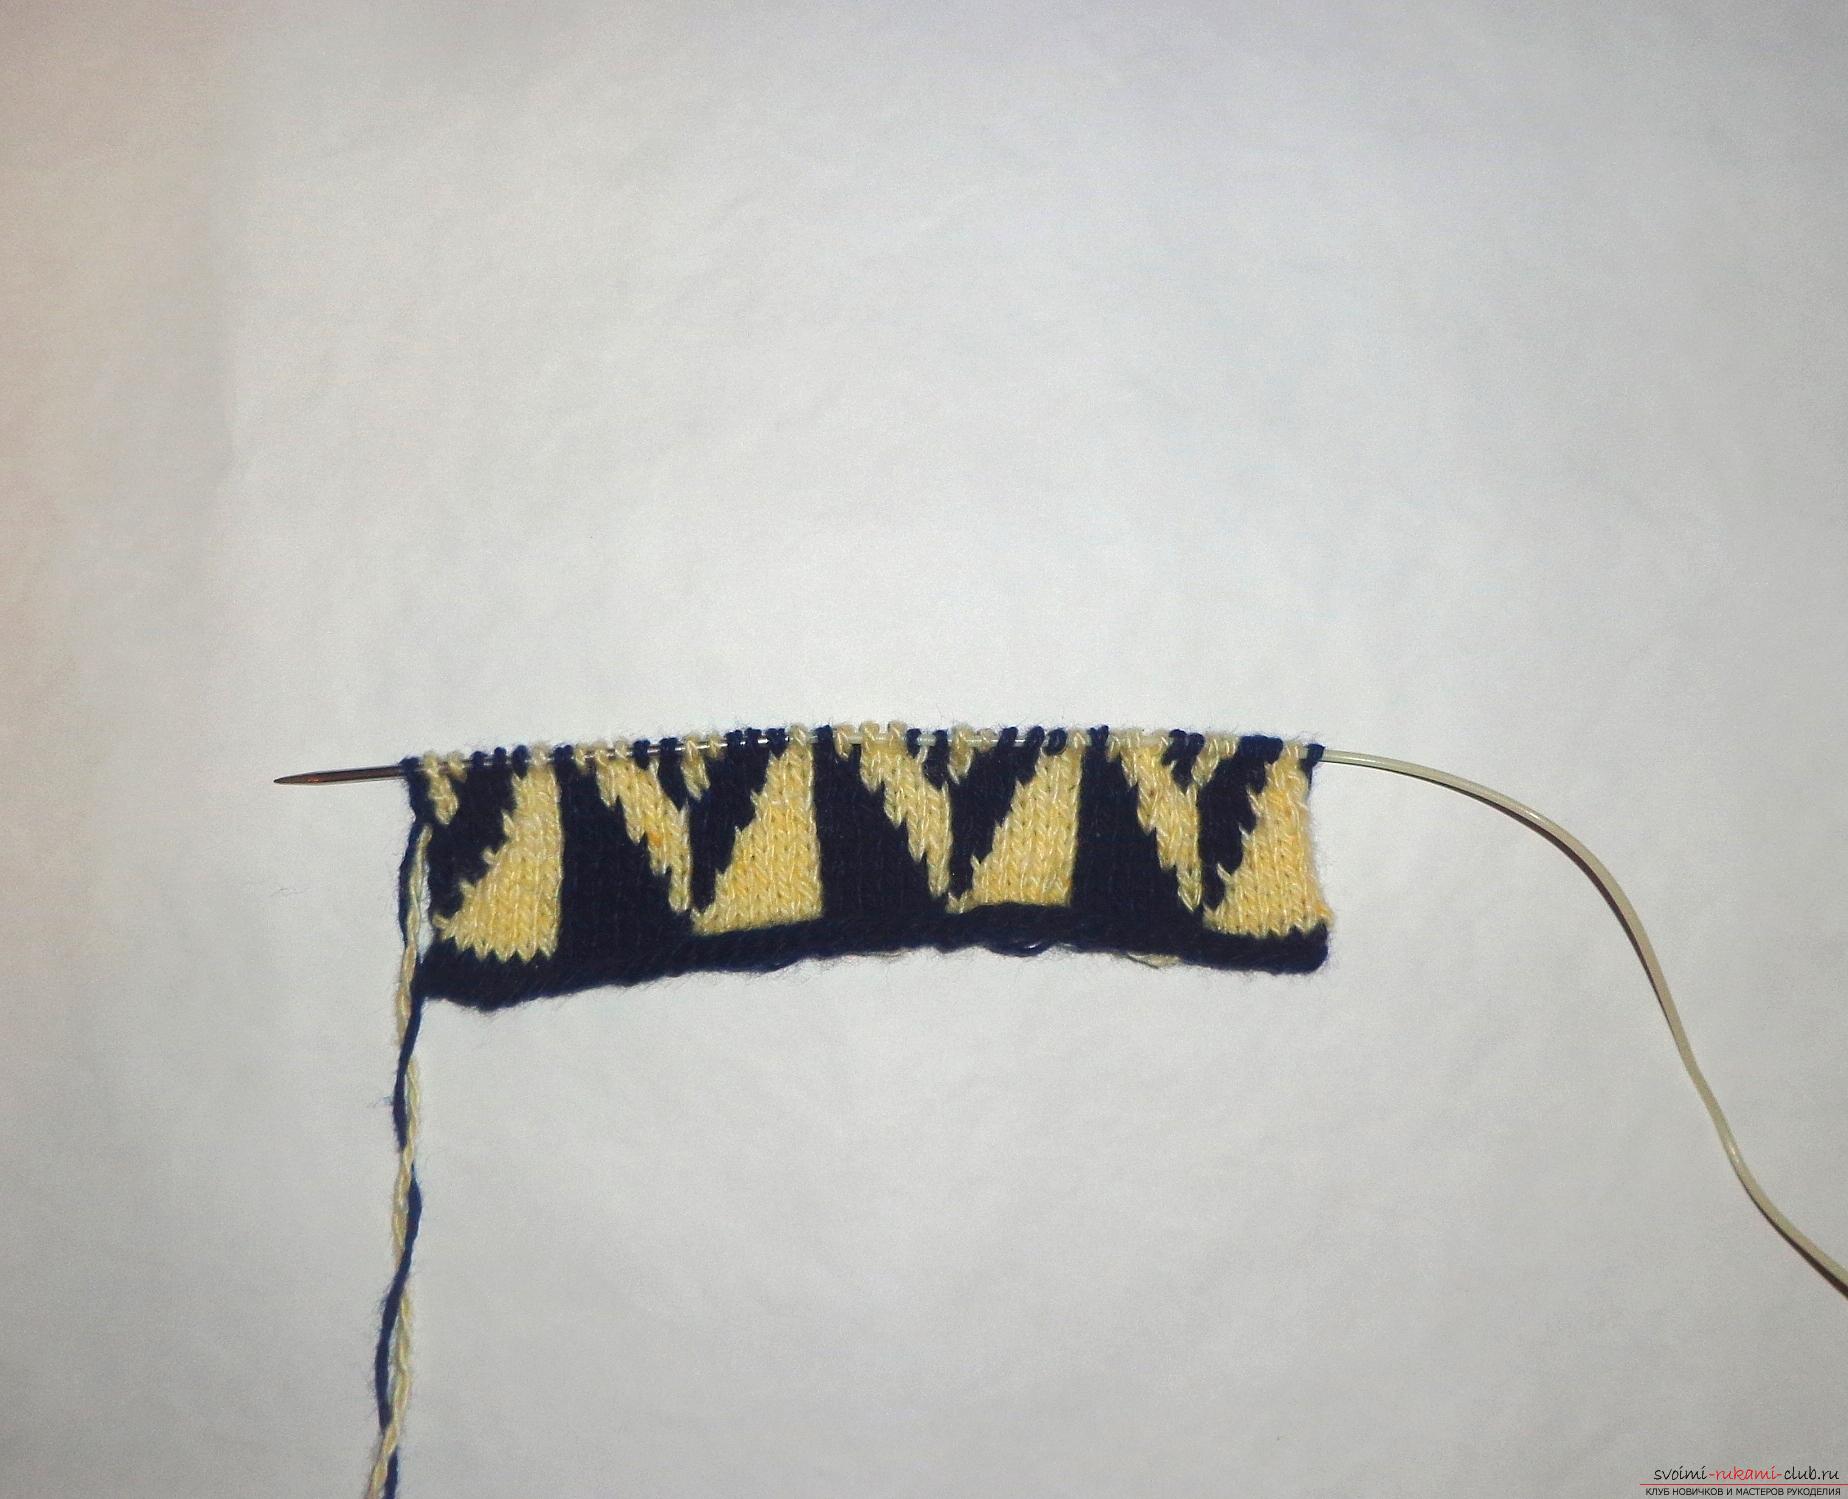 The master class will tell you how to create a knitted stylish knitting needle with your own hands. Photo # 2